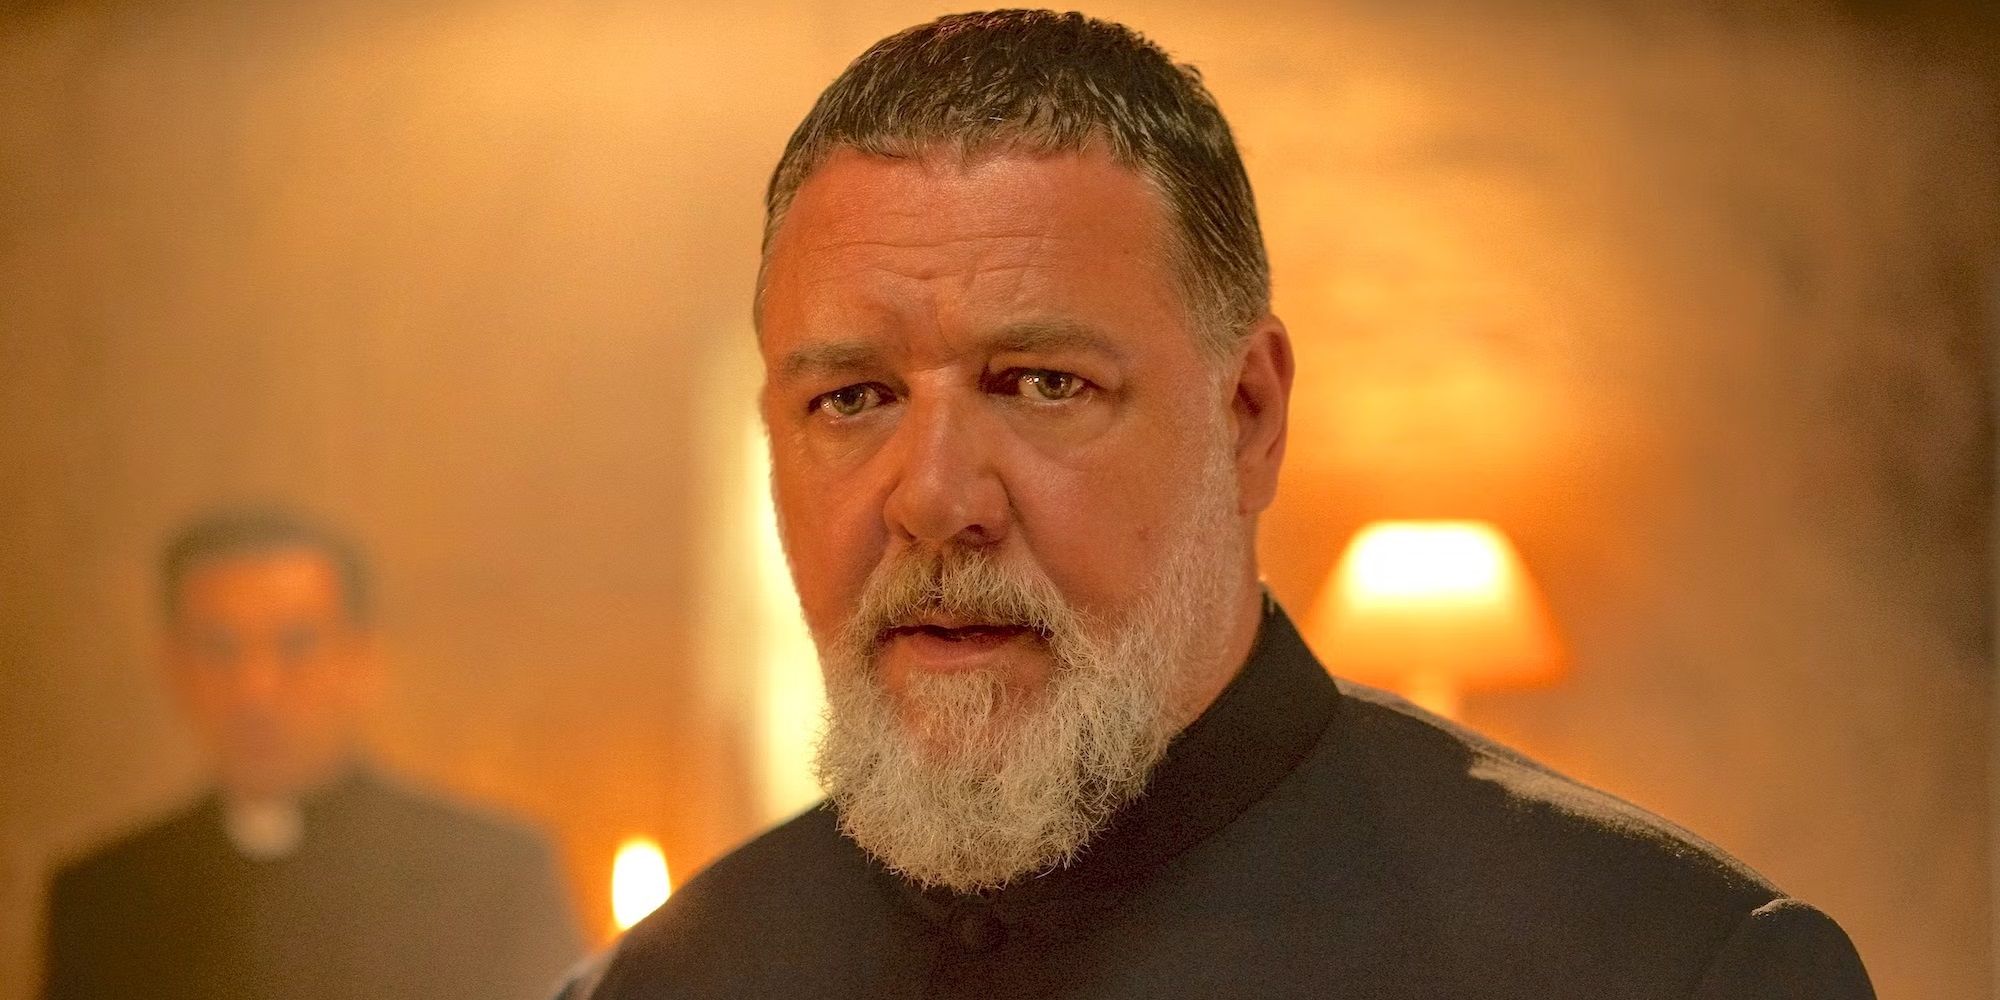 Russell Crowe’s Sequel To M Movie Is More Important When Seeing His 10-Year Box Office Trend